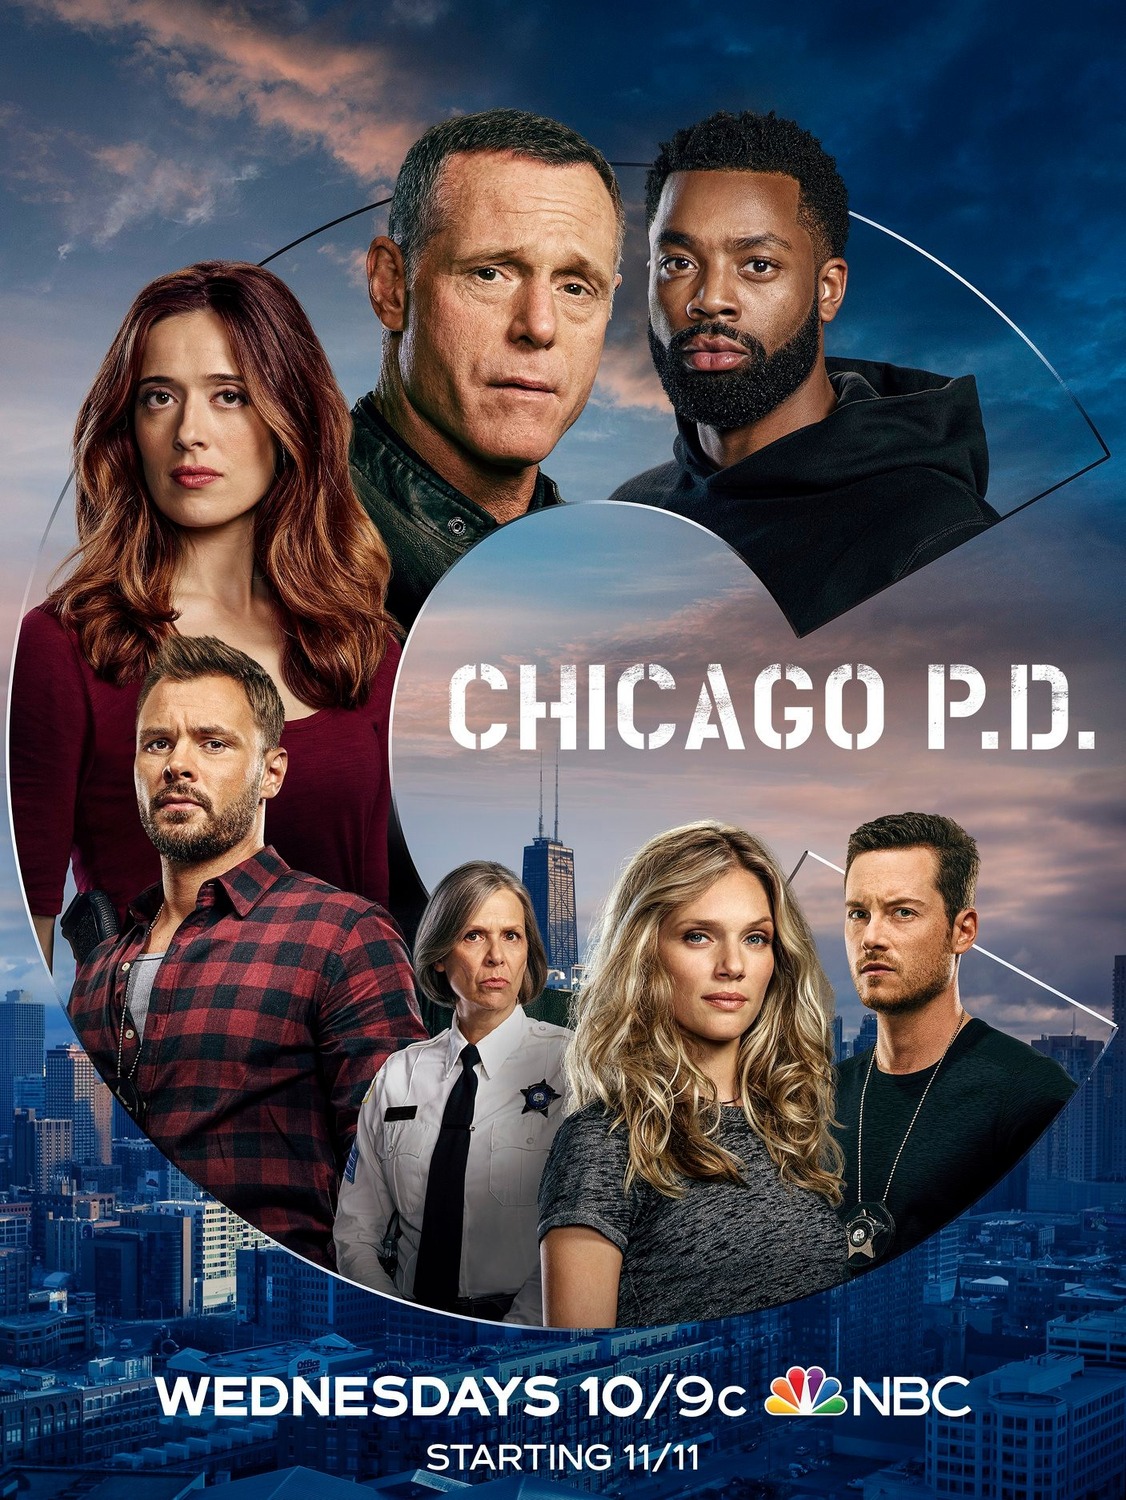 CHICAGO PD Season 8 Trailer, Clips, Images and Poster The